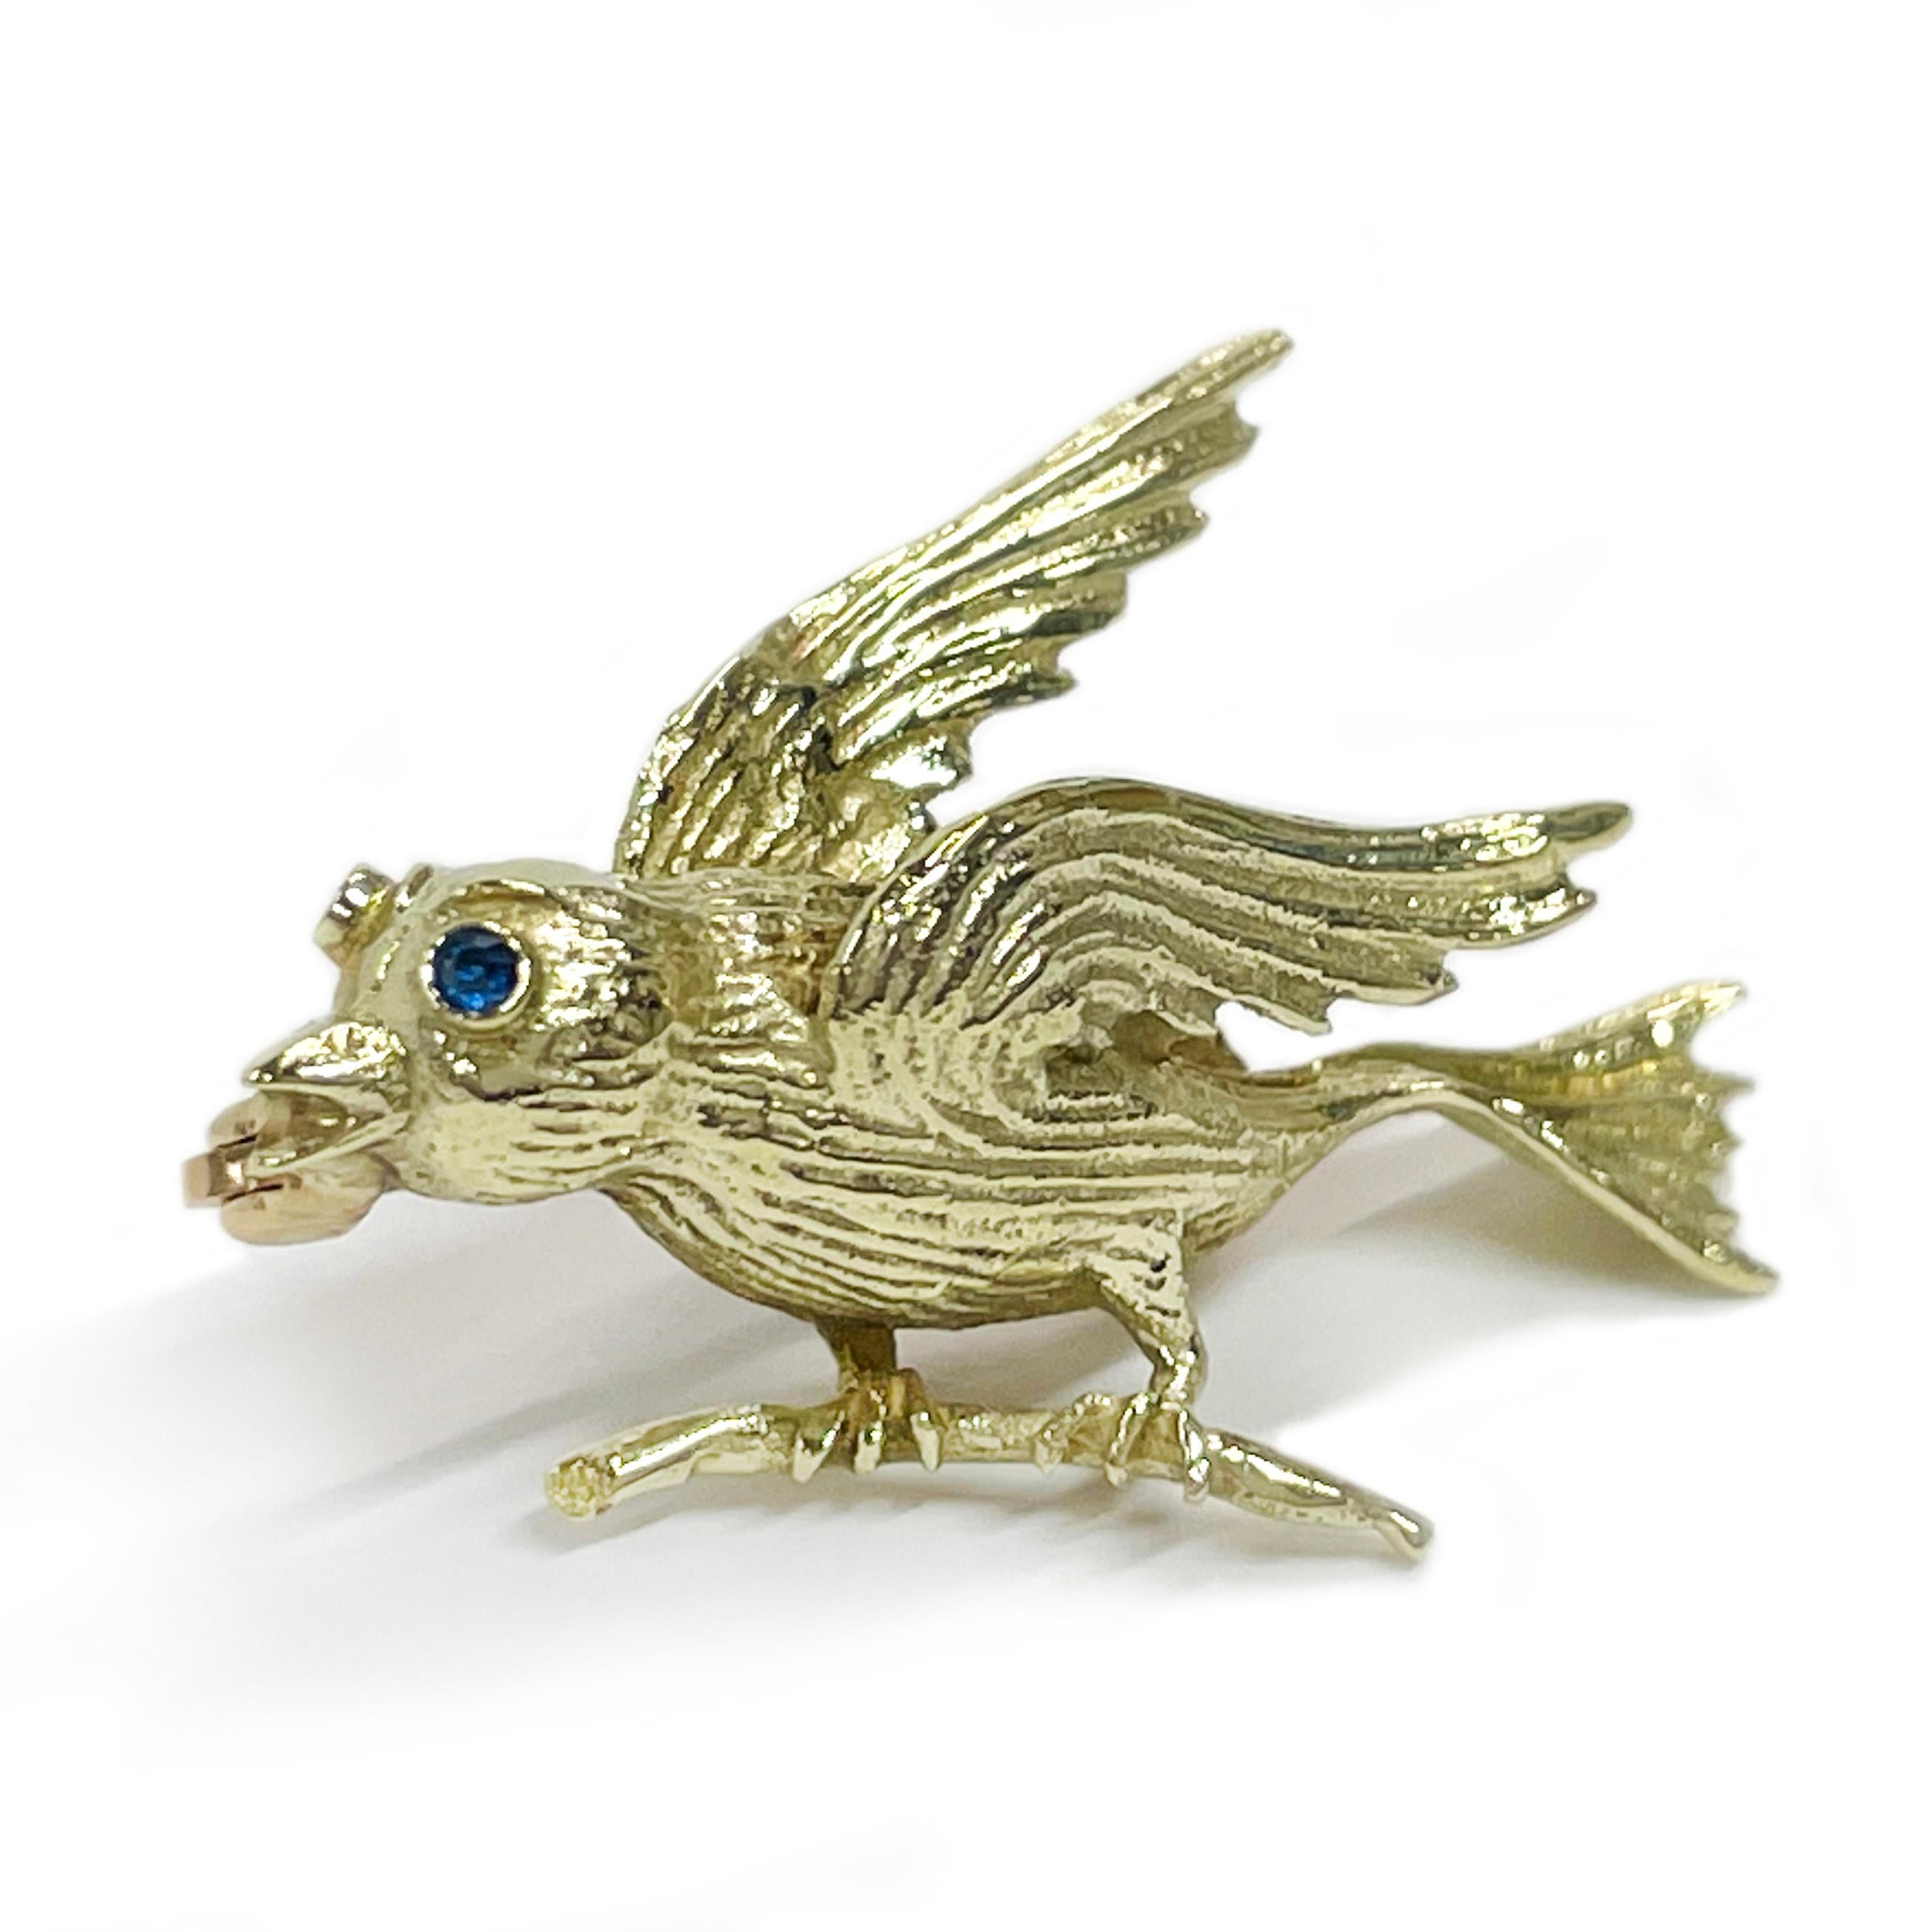 14 Karat Yellow Gold Sapphire Bird Brooch. This adorable little bird is standing on a branch and seems to be ready to take flight. The body features a textured body, wings, feet and head with a round blue sapphire flush-set as the eye. The blue